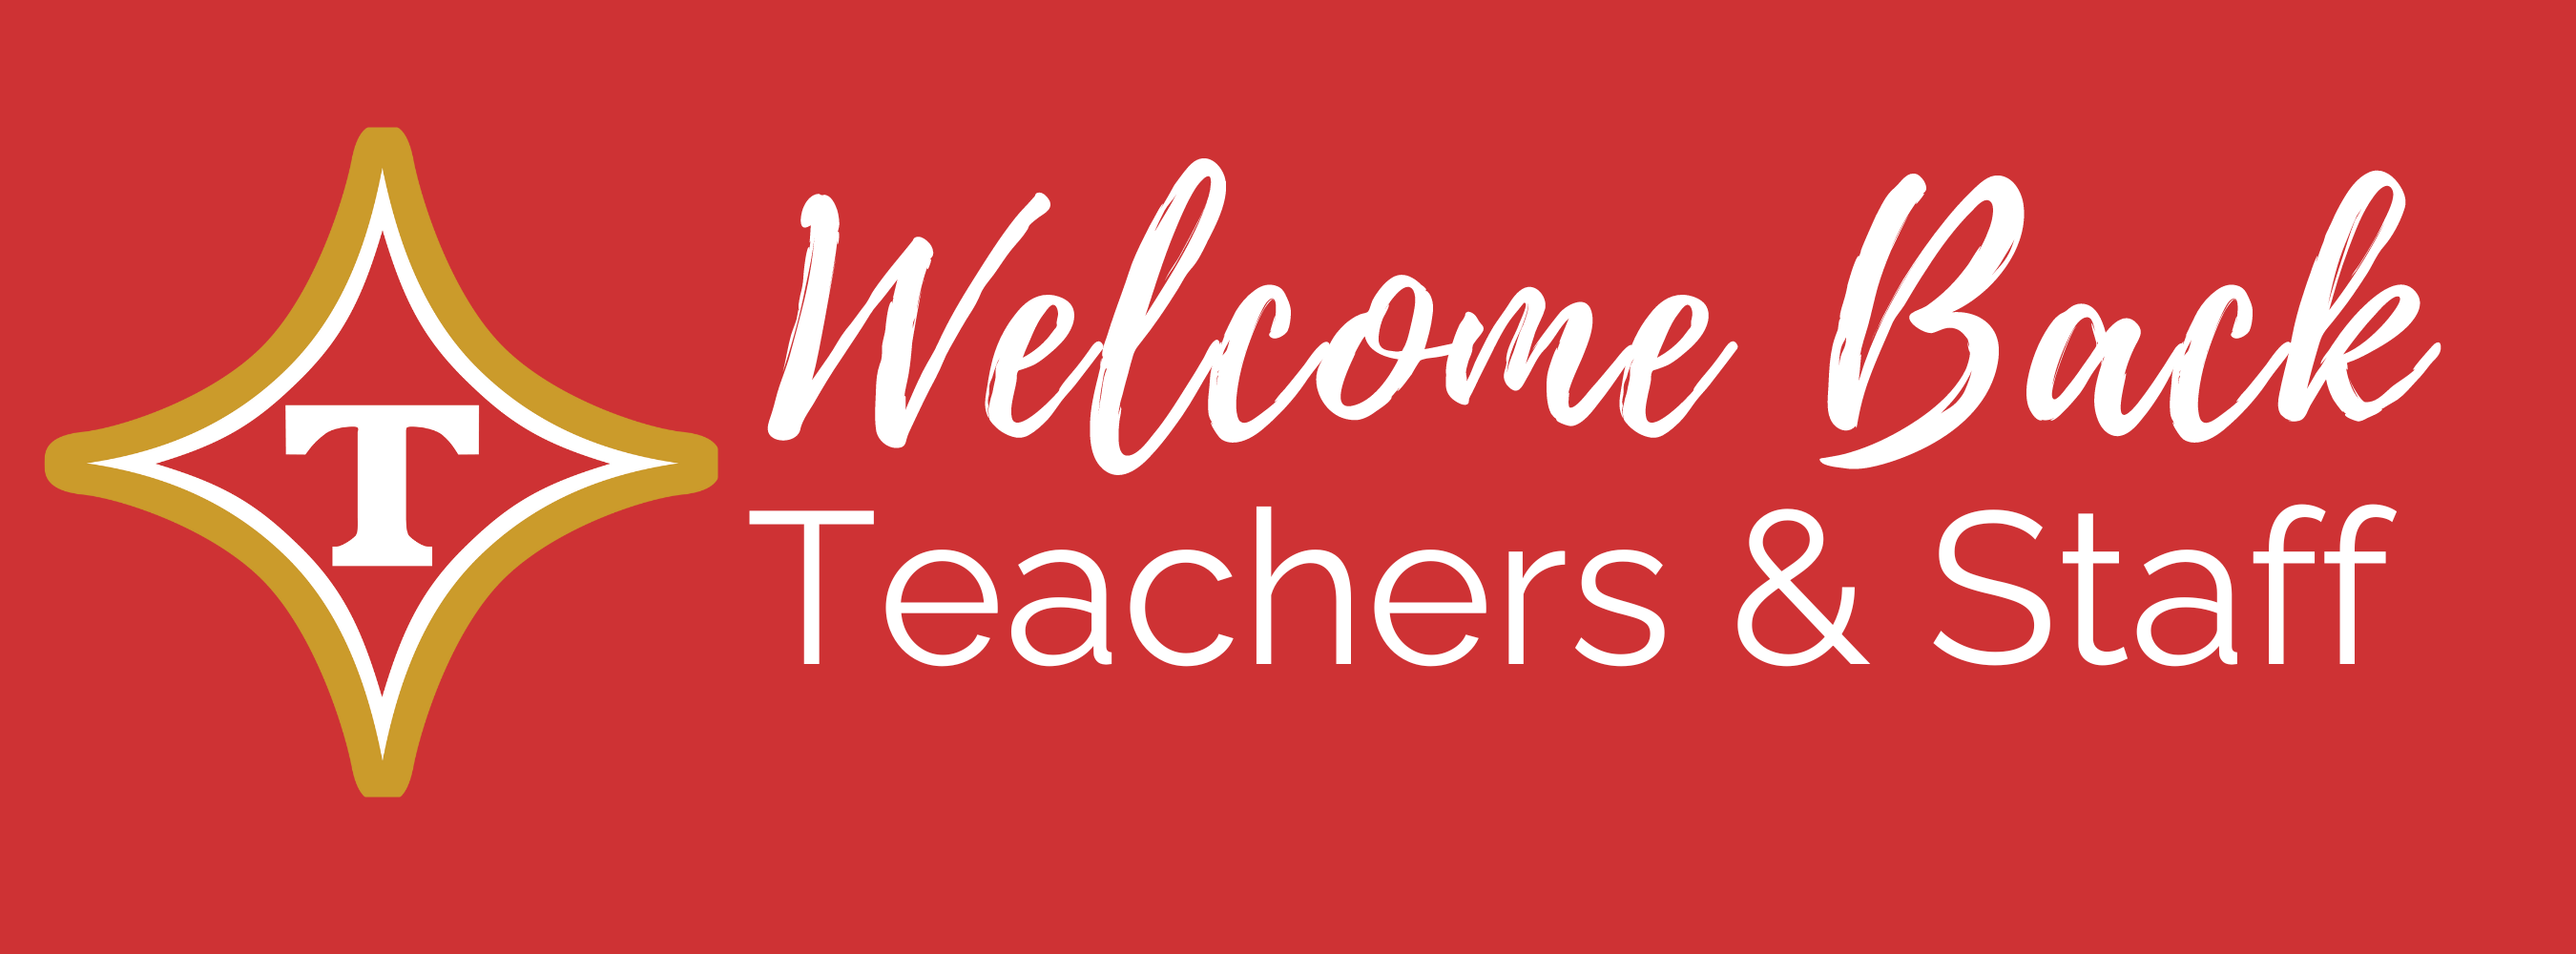 Welcome back teachers and staff